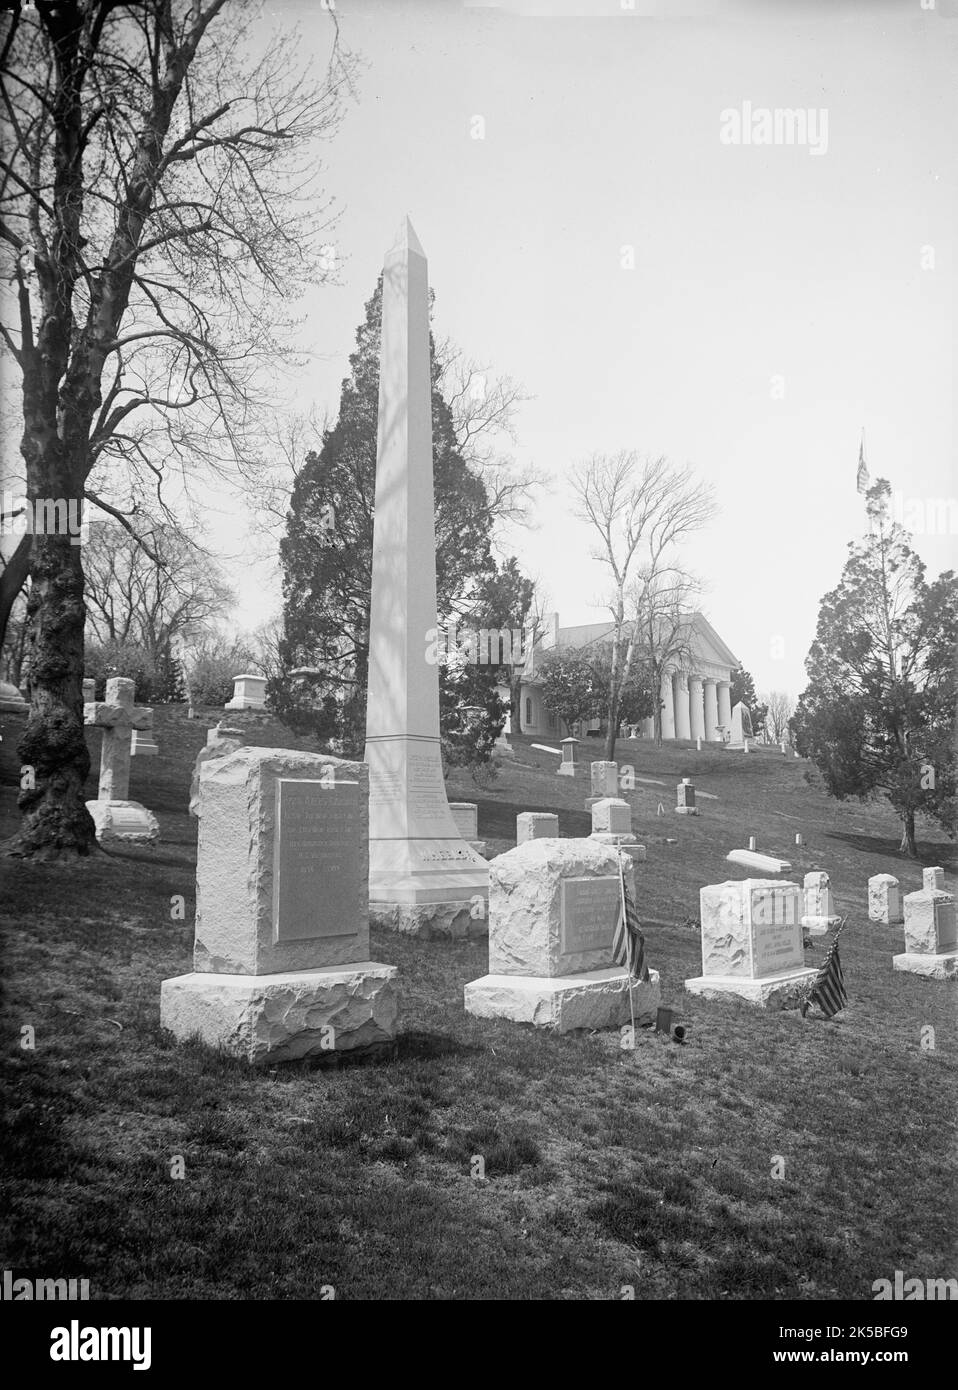 Arlington Mansion, Arlington National Cemetery, 1917. Civil War graves: memorials to Ezra Ayers Carman of the New Jersey Infantry, Union Army, and Joseph Wheeler, Lieutenant General, Confederate States Army. Home of Confederate Army General Robert E. Lee in the distance. Stock Photo